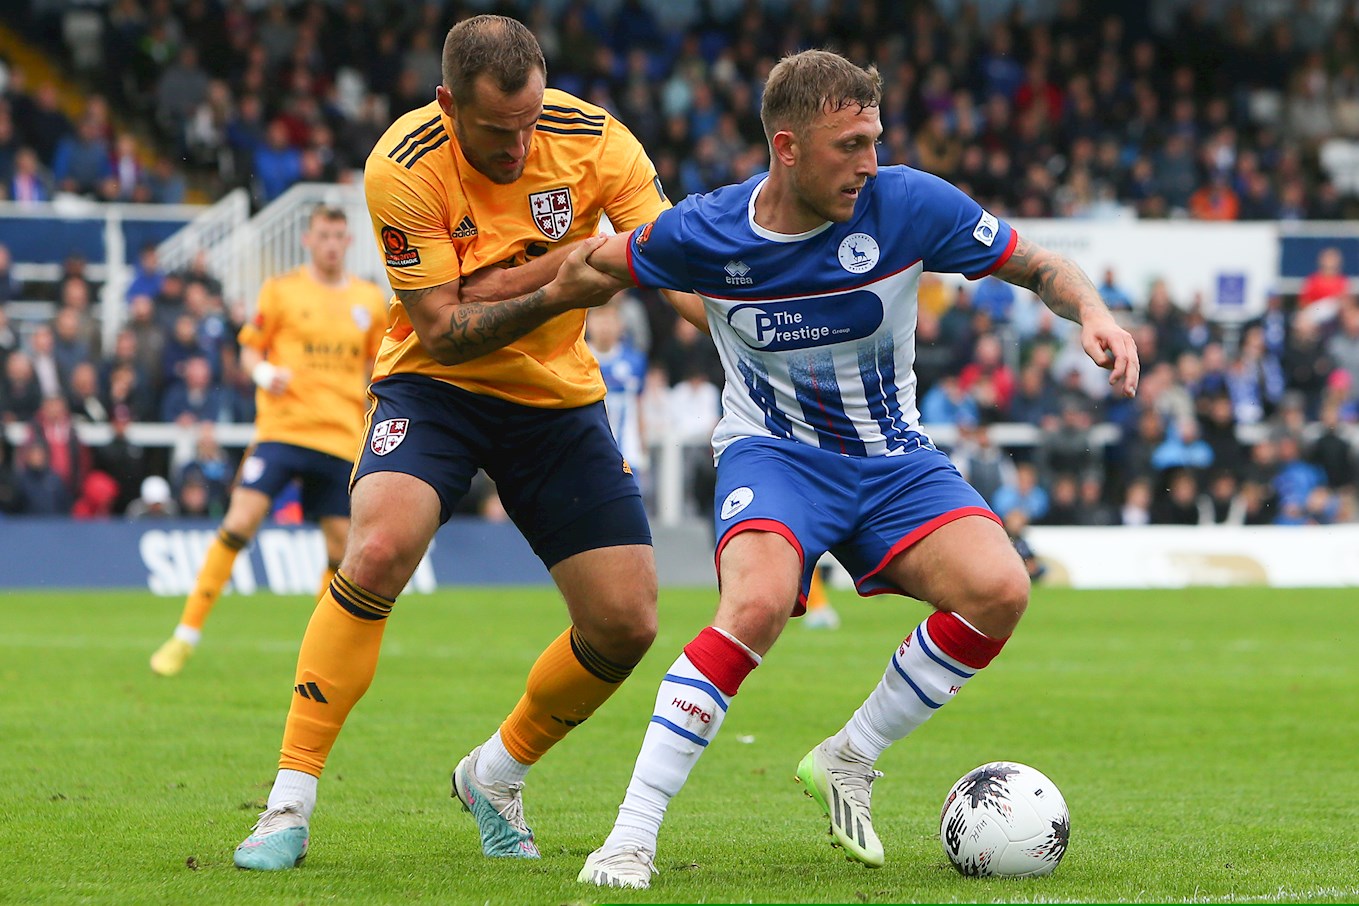 Hartlepool United vs Altrincham FC: Live Score, Stream and H2H results  2/20/2024. Preview match Hartlepool United vs Altrincham FC, team, start  time.